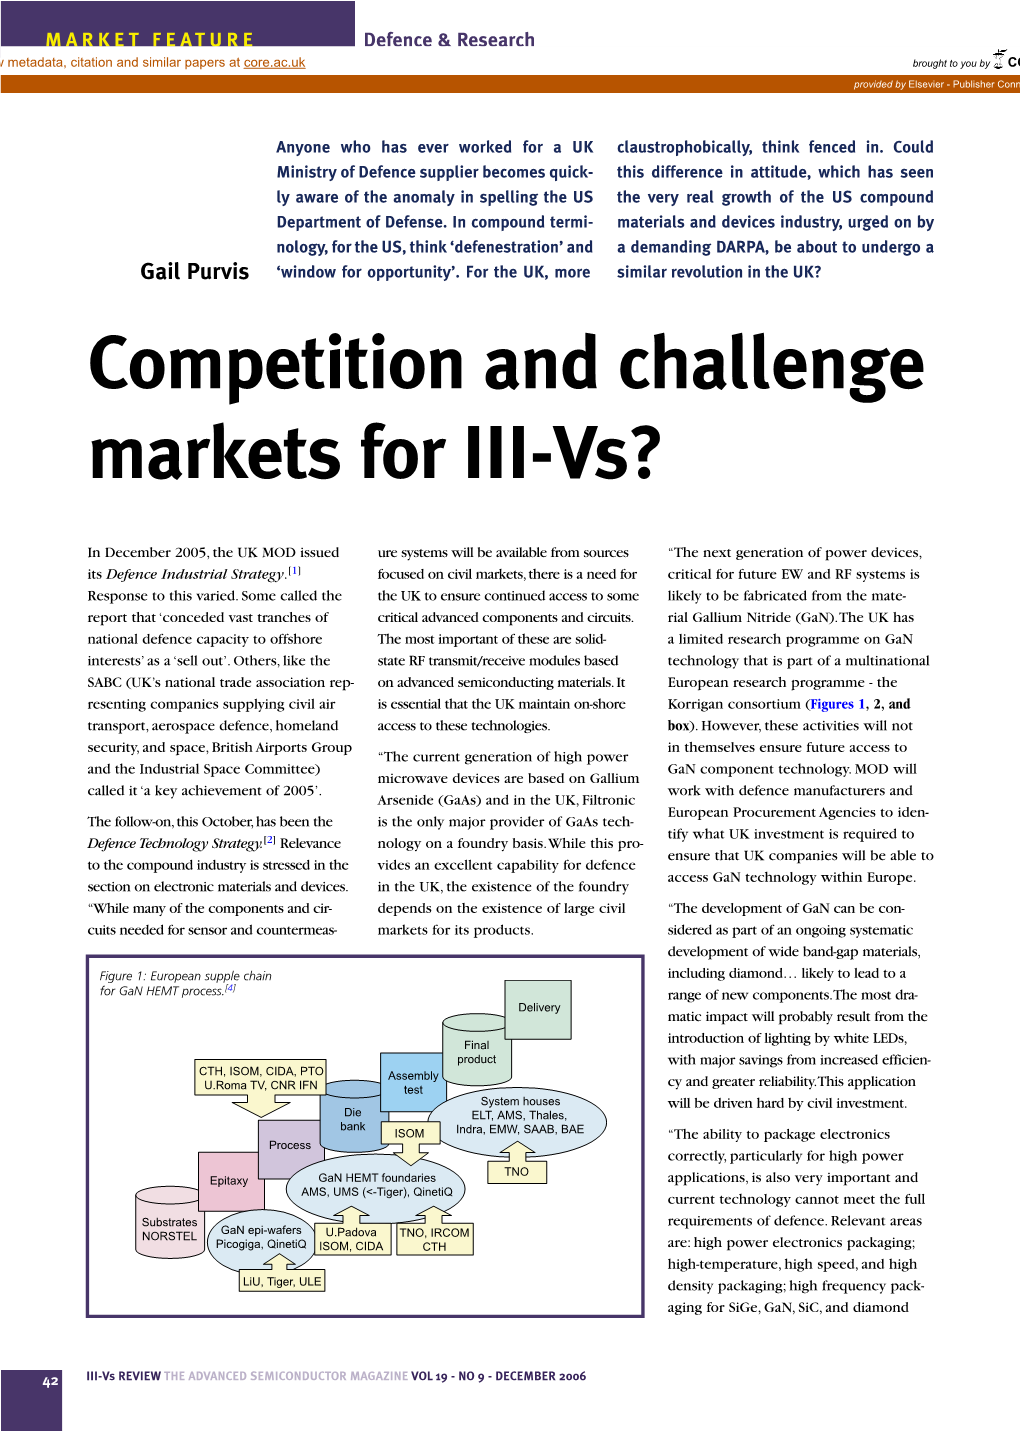 Competition and Challenge Markets for III-Vs?